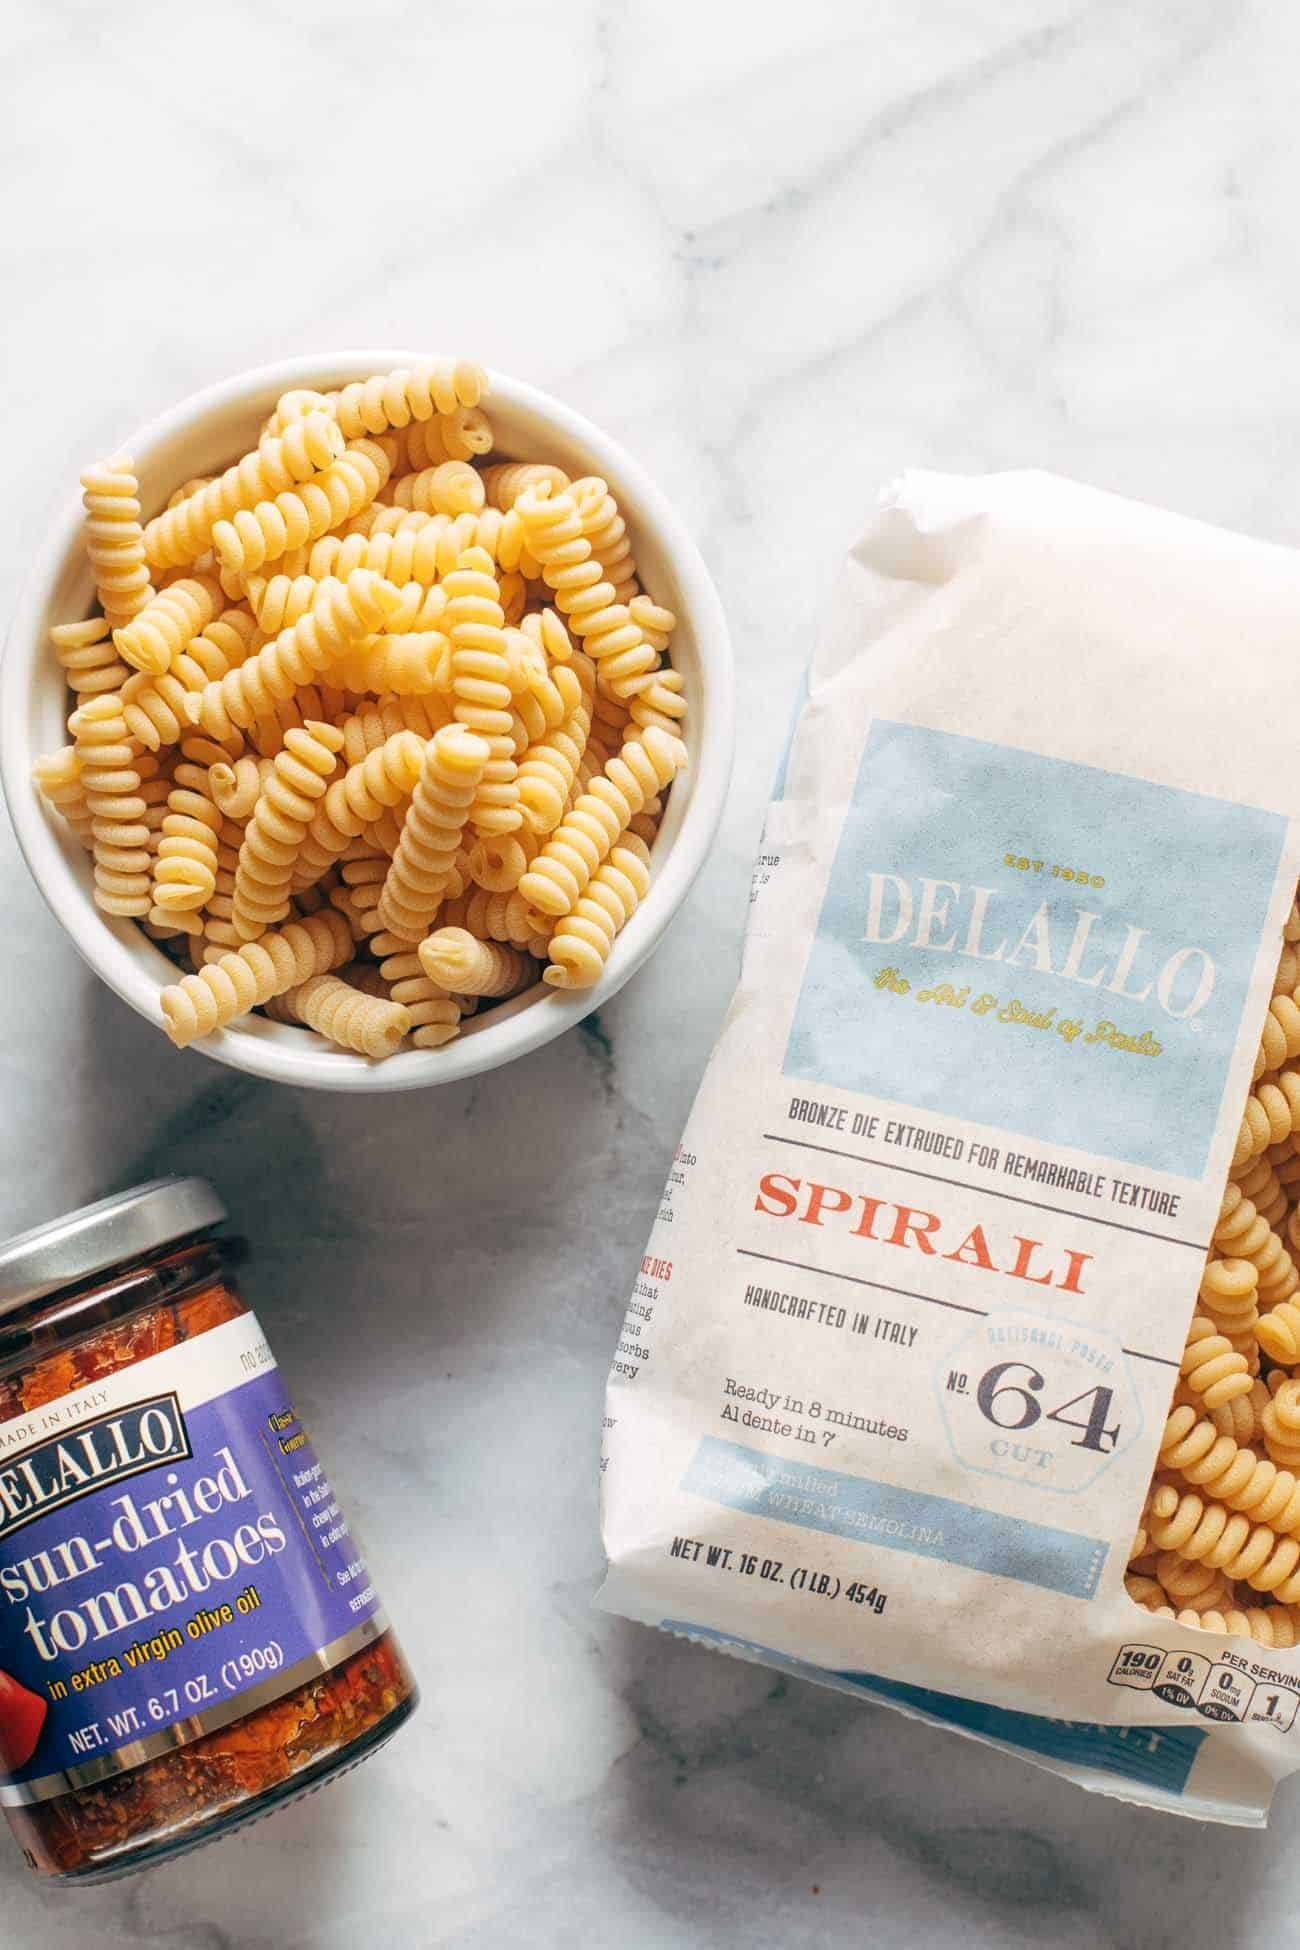 Ingredients for Creamy Sun-Dried Tomato Pasta with spirali noodles and sun-dried tomatoes